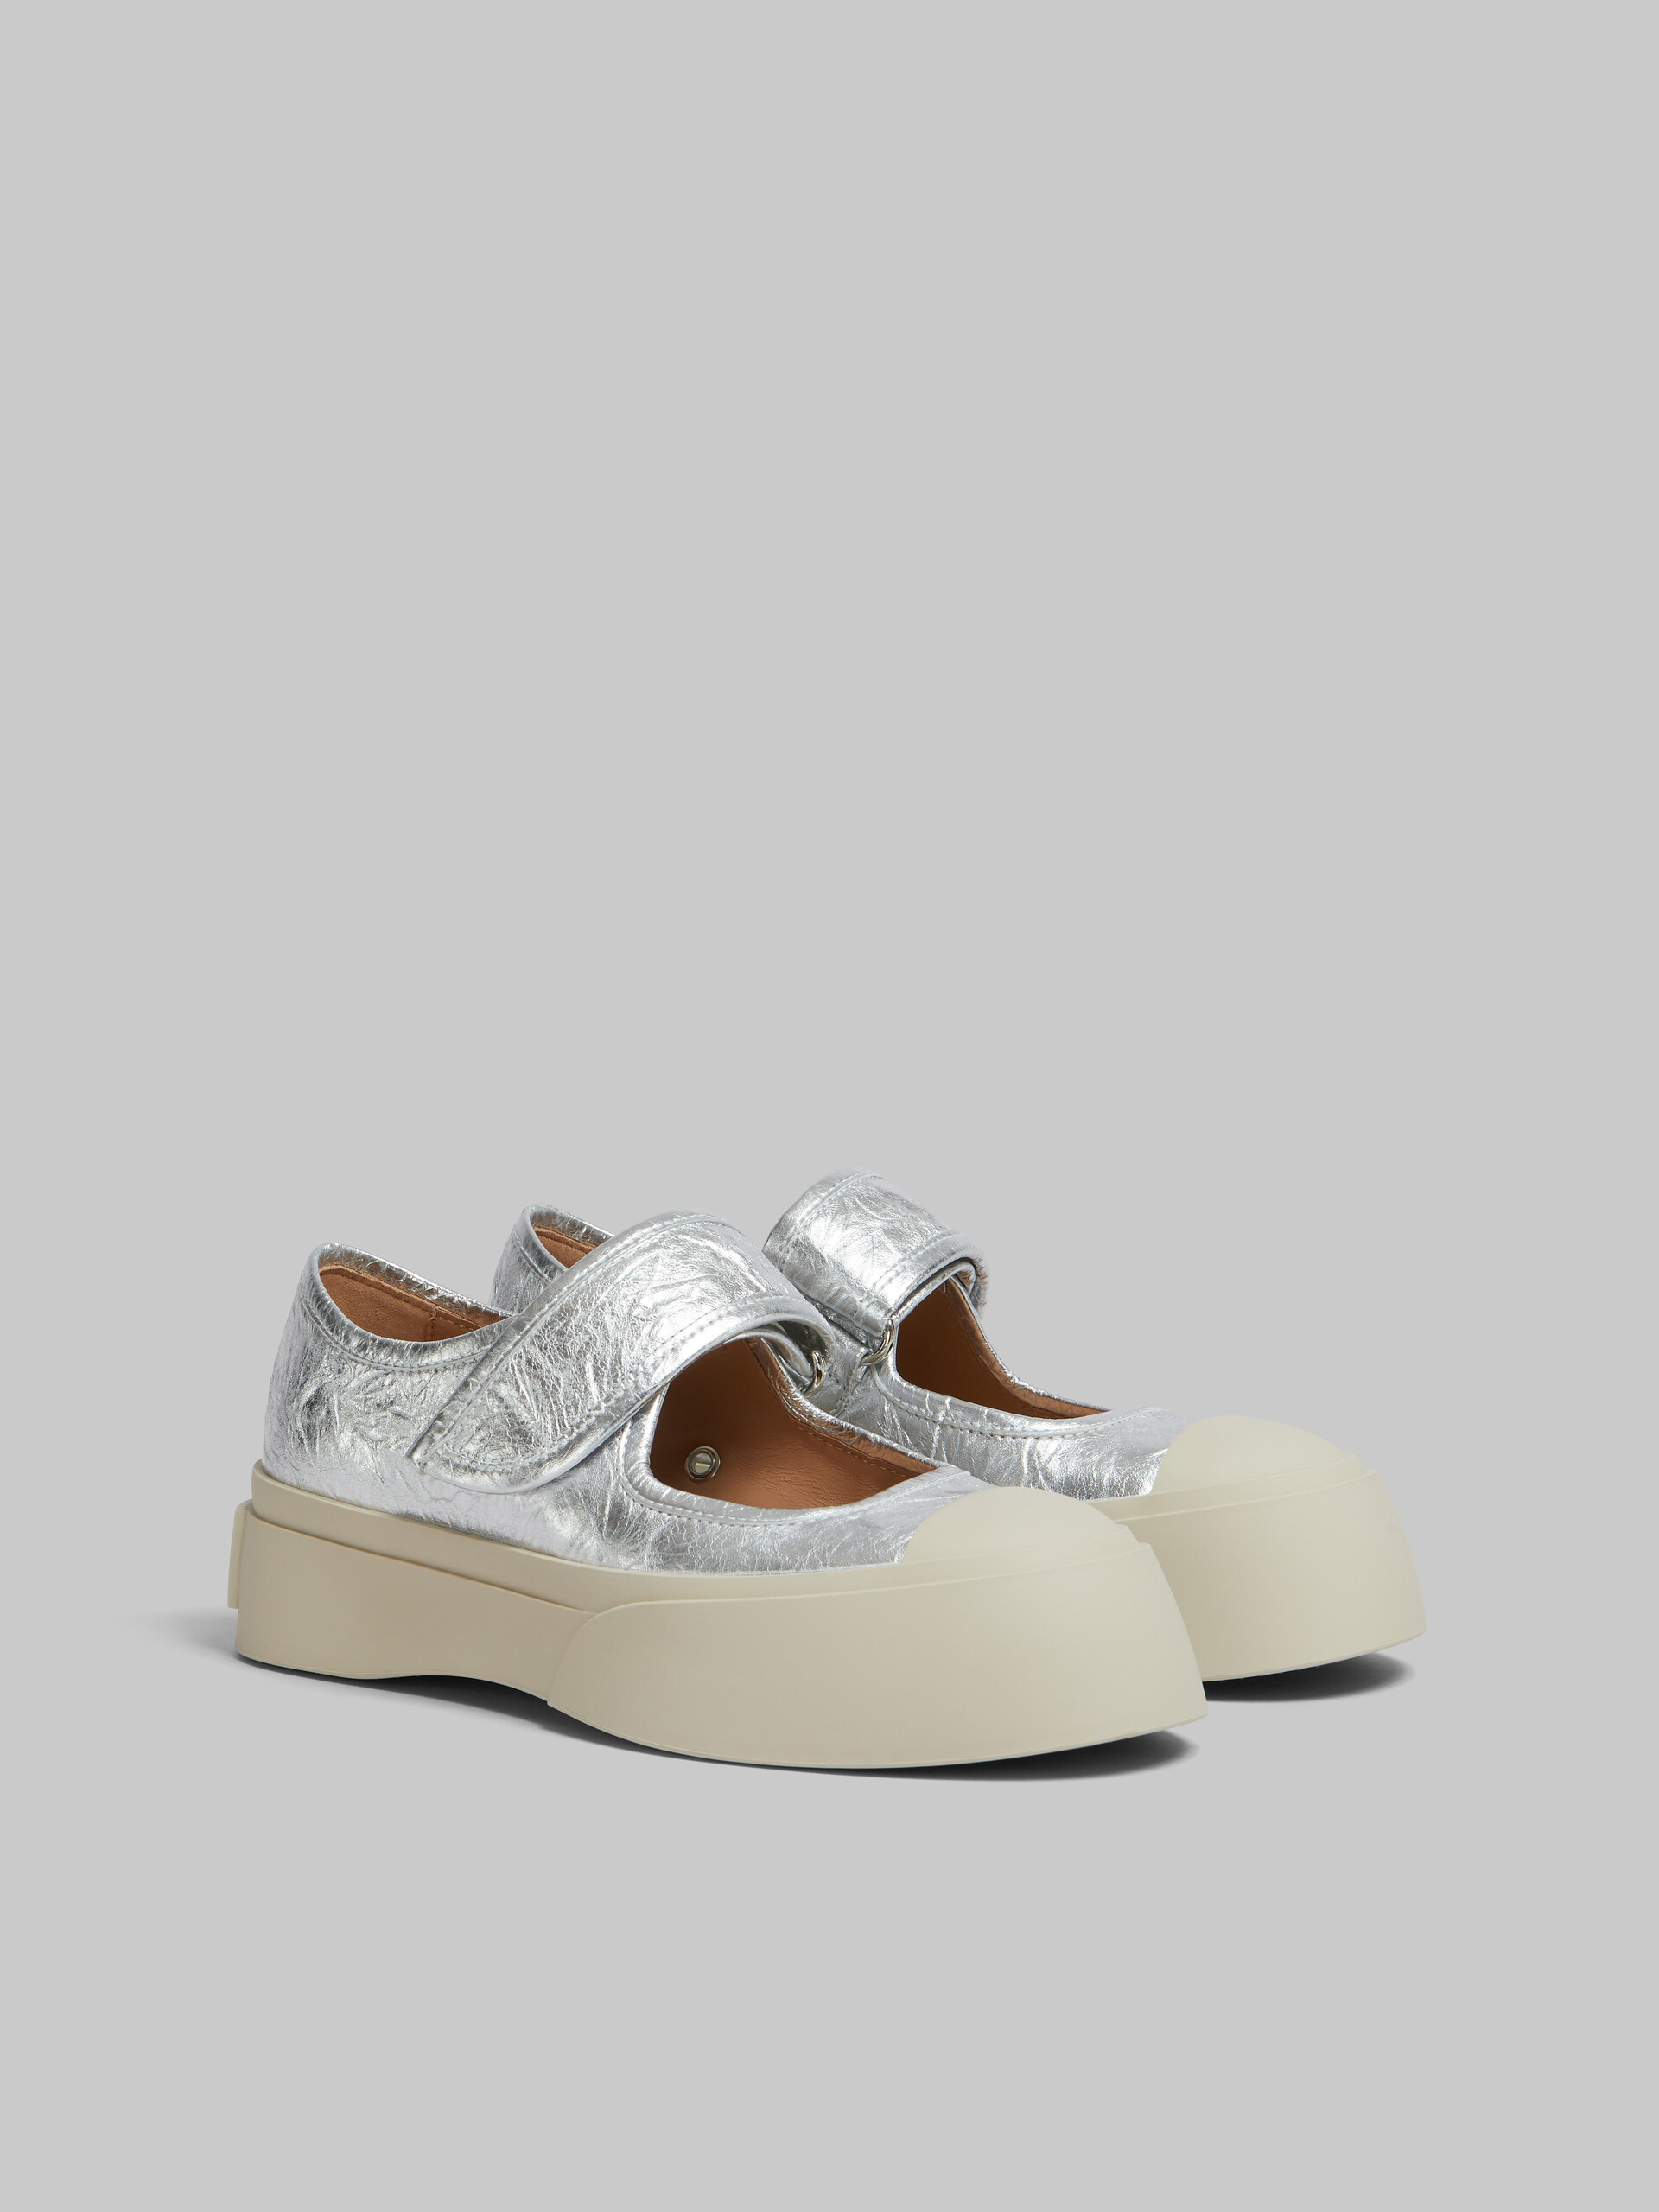 Sneaker Mary Jane in pelle color argento - Sneakers - Image 2